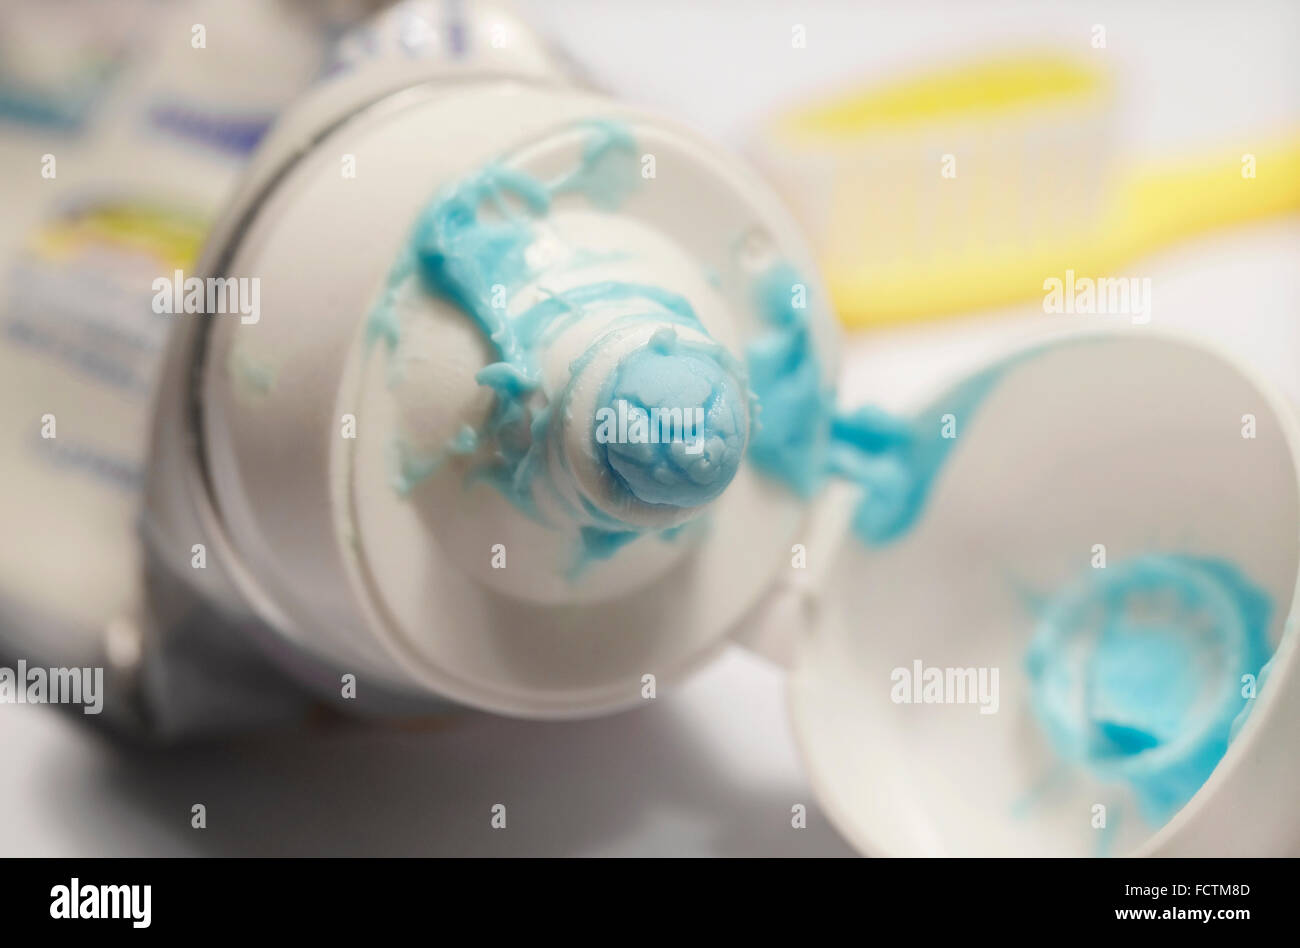 Messy Toothpaste High Resolution Stock Photography And Images Alamy